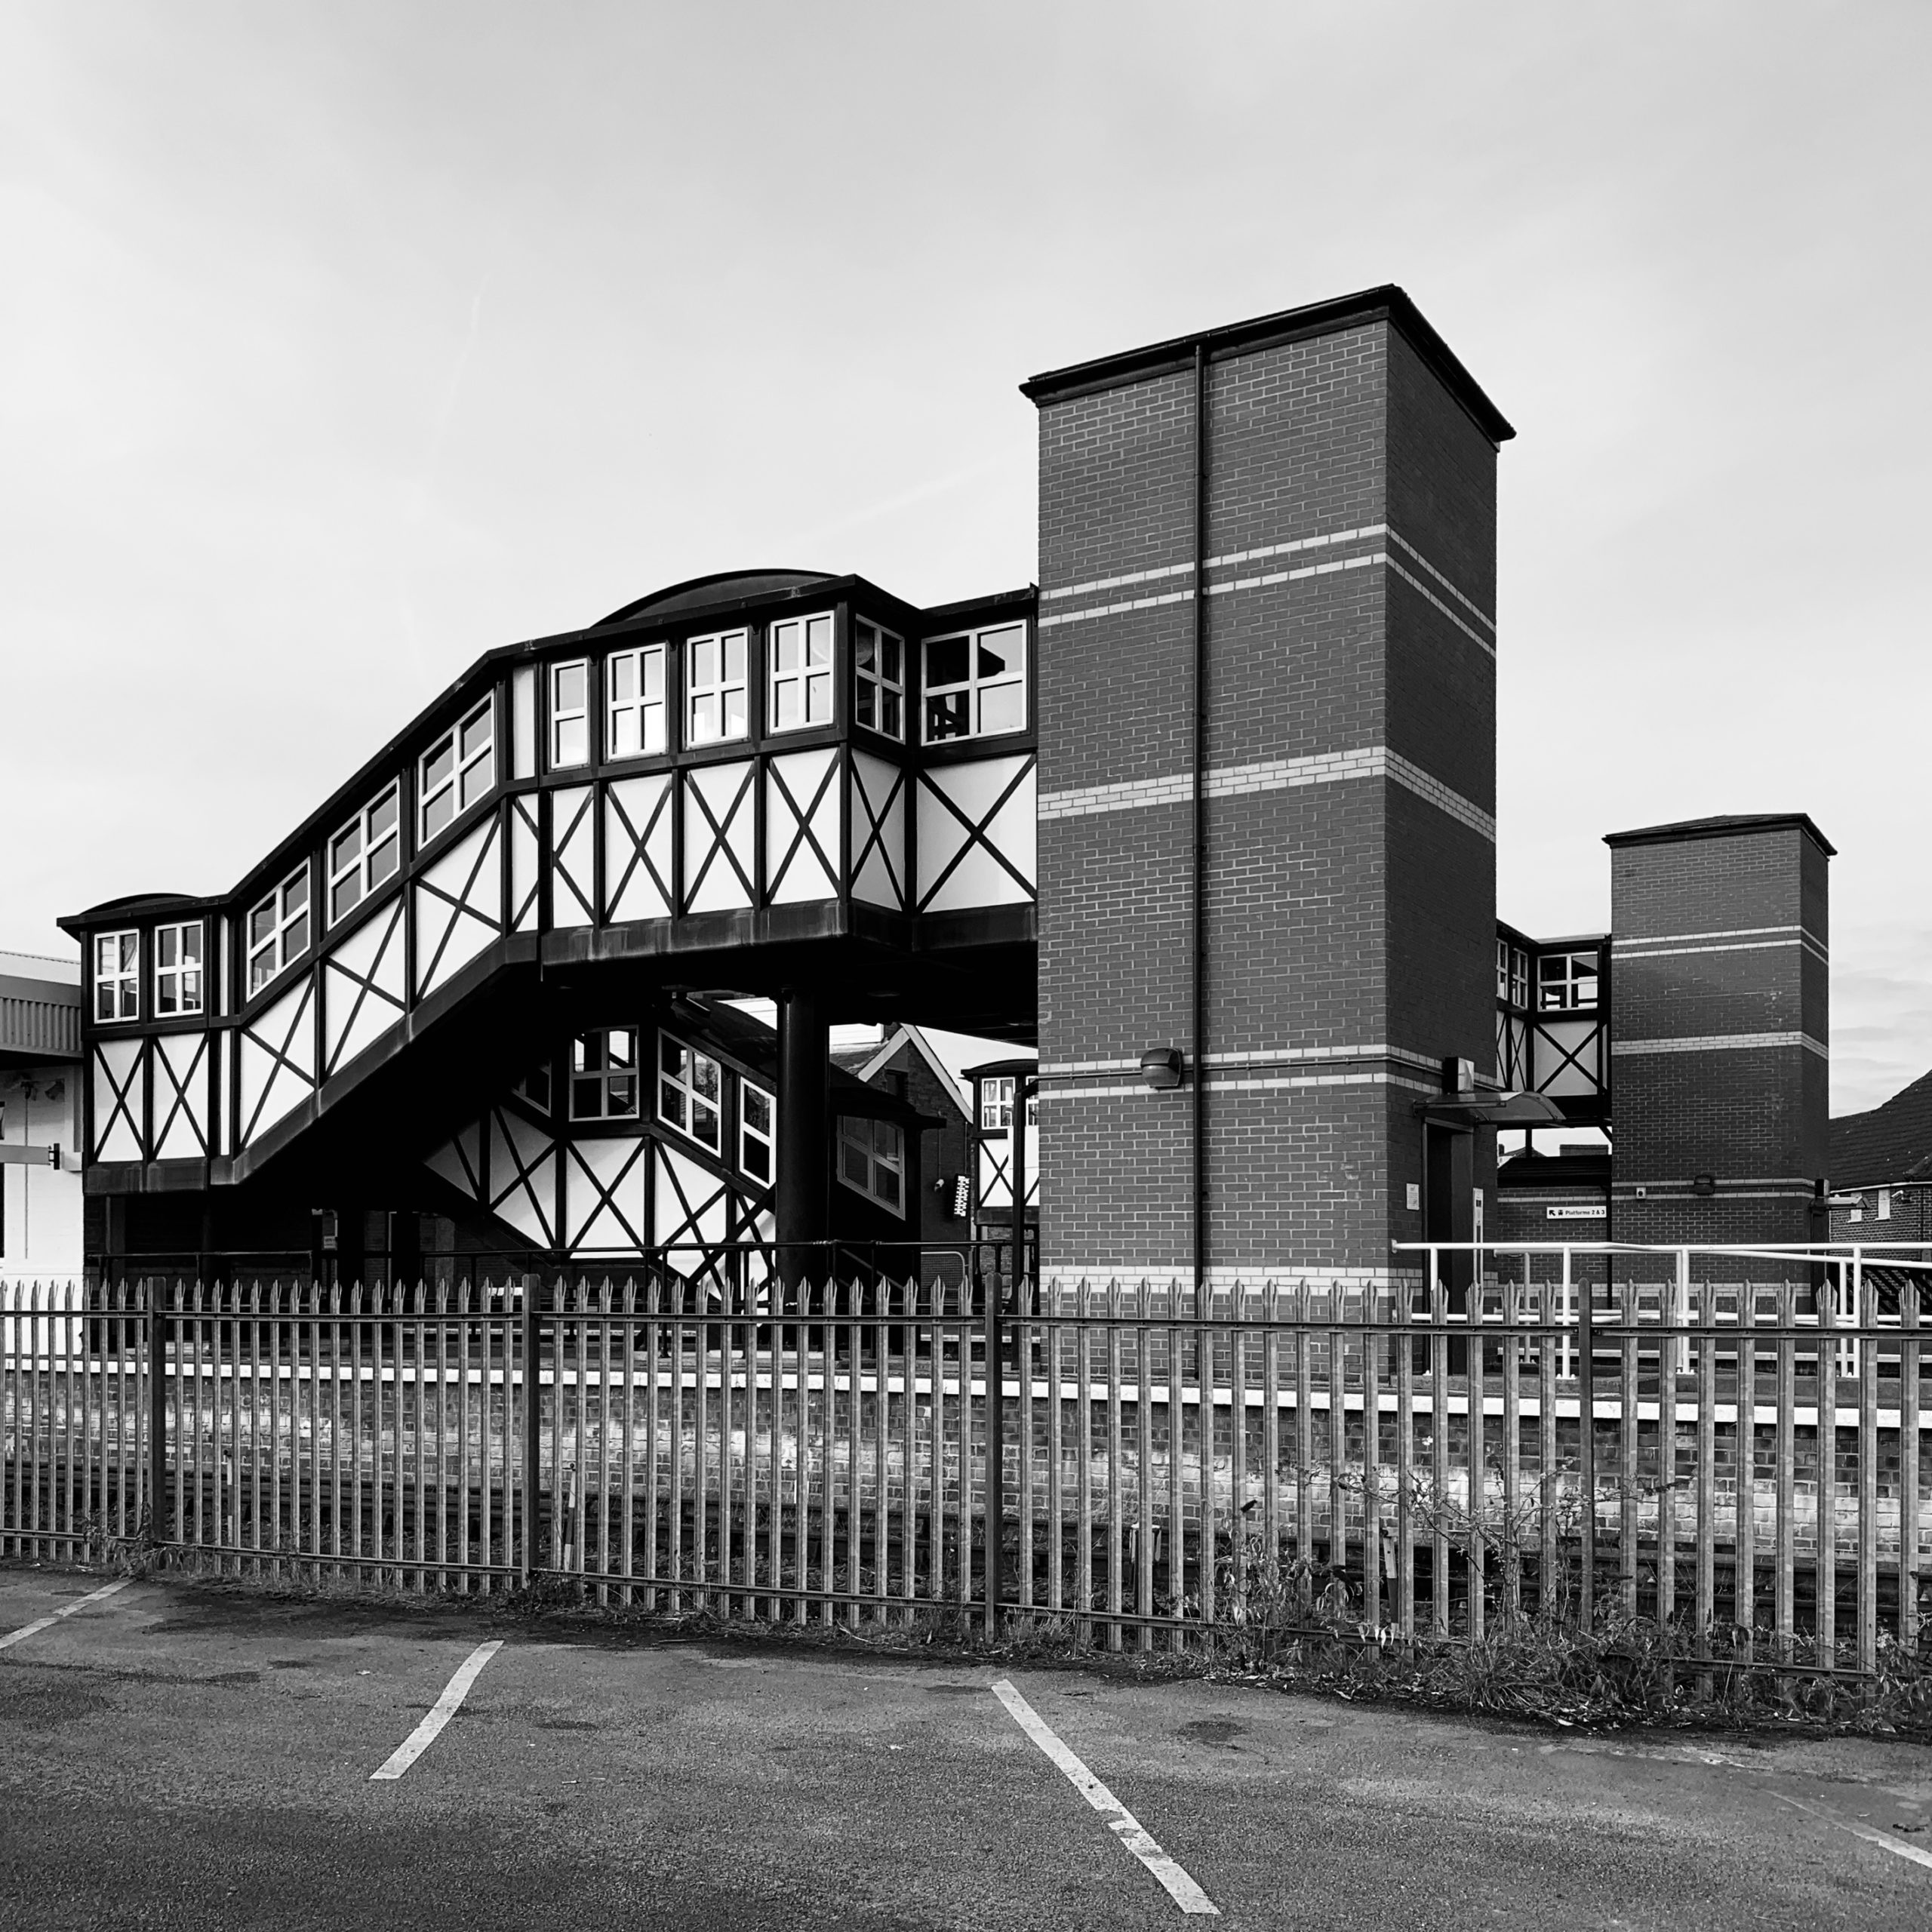 Grimsby Station​